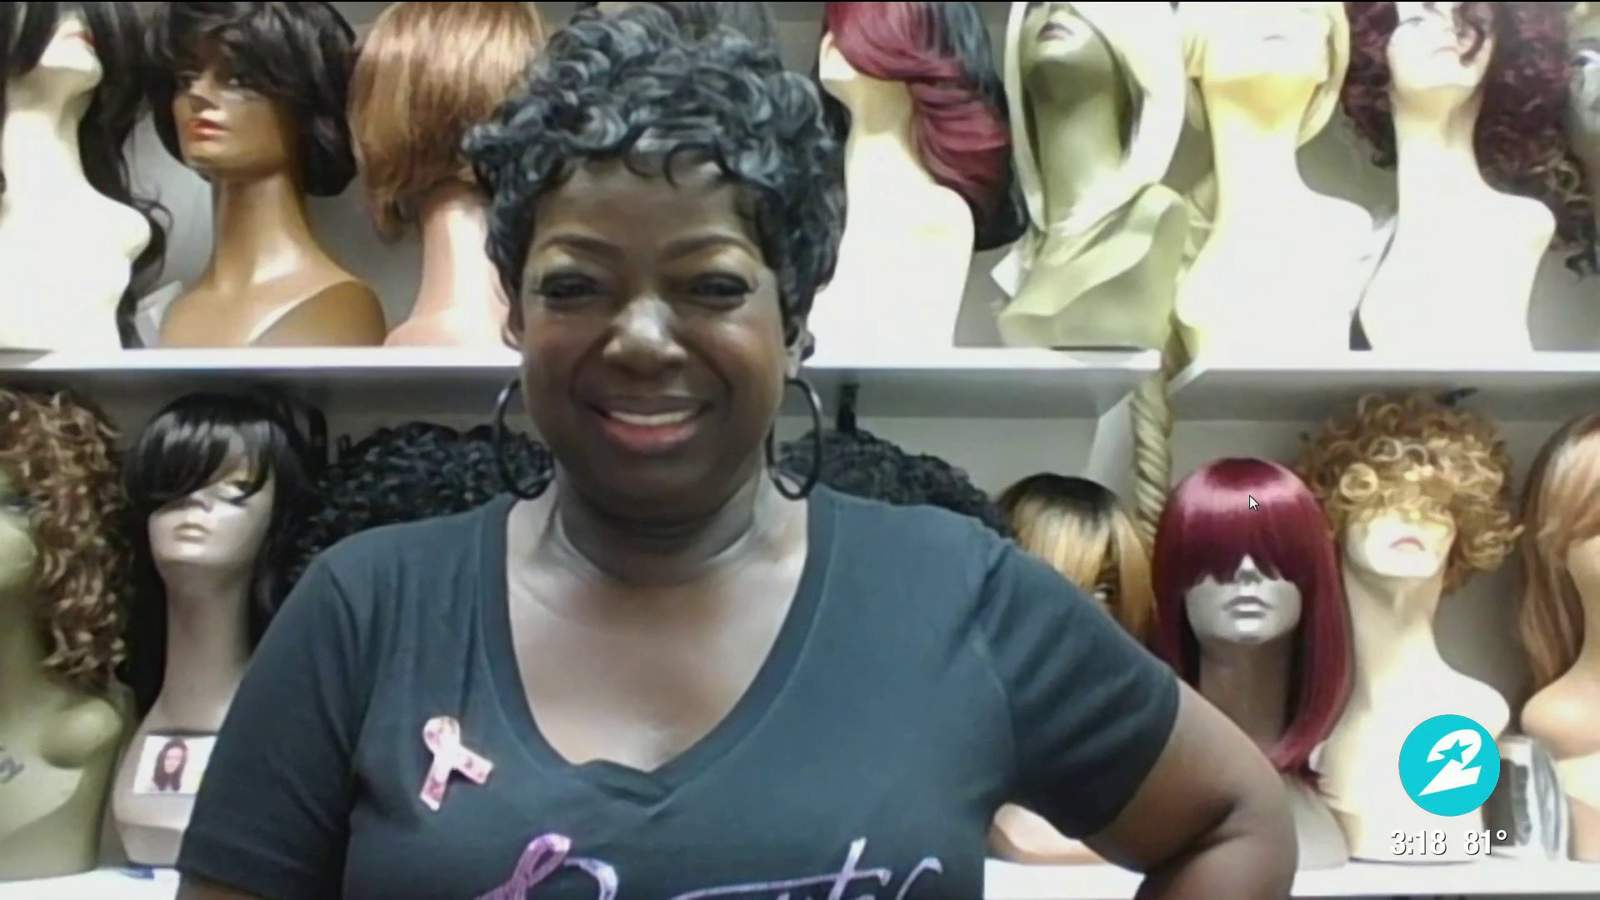 This Houston hairstylist is on a mission to empower breast cancer patients